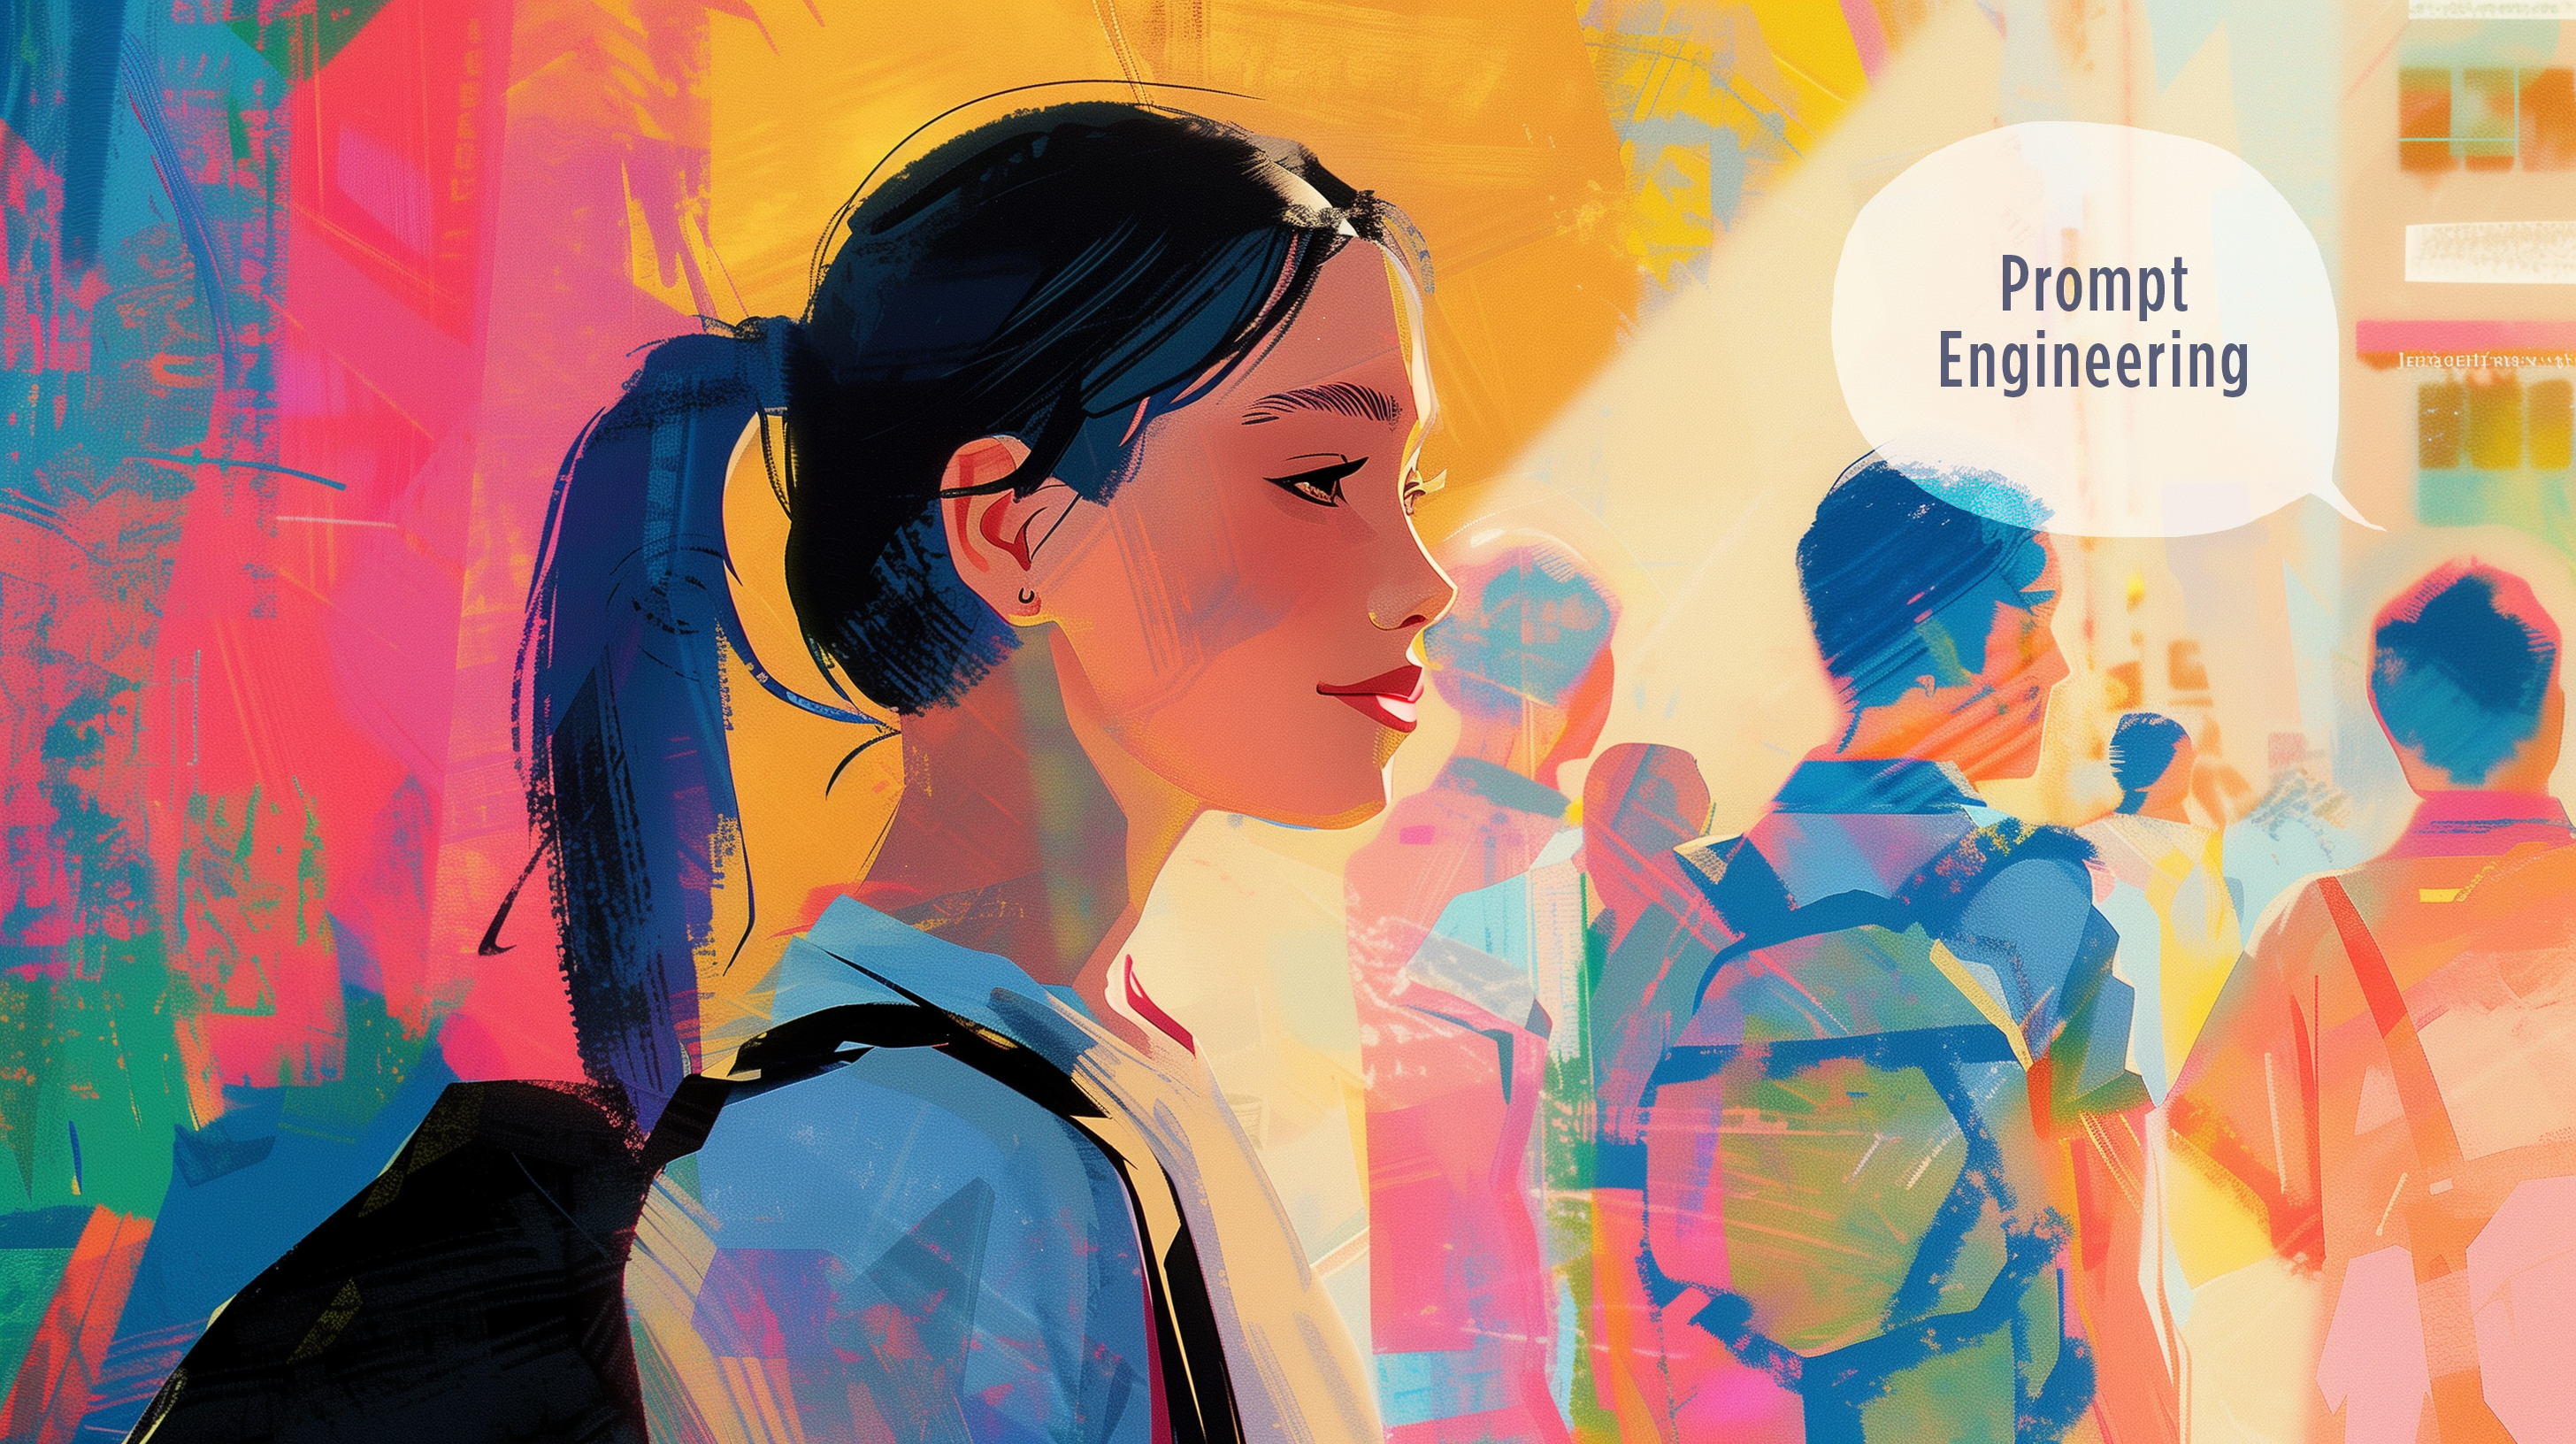 A colorful, abstract digital artwork of a young woman with a ponytail, wearing a backpack, standing amidst a crowd. She is looking to the side, with the words "Prompt Engineering" in a speech bubble near her. The background features vibrant, multicolored patterns and shapes.